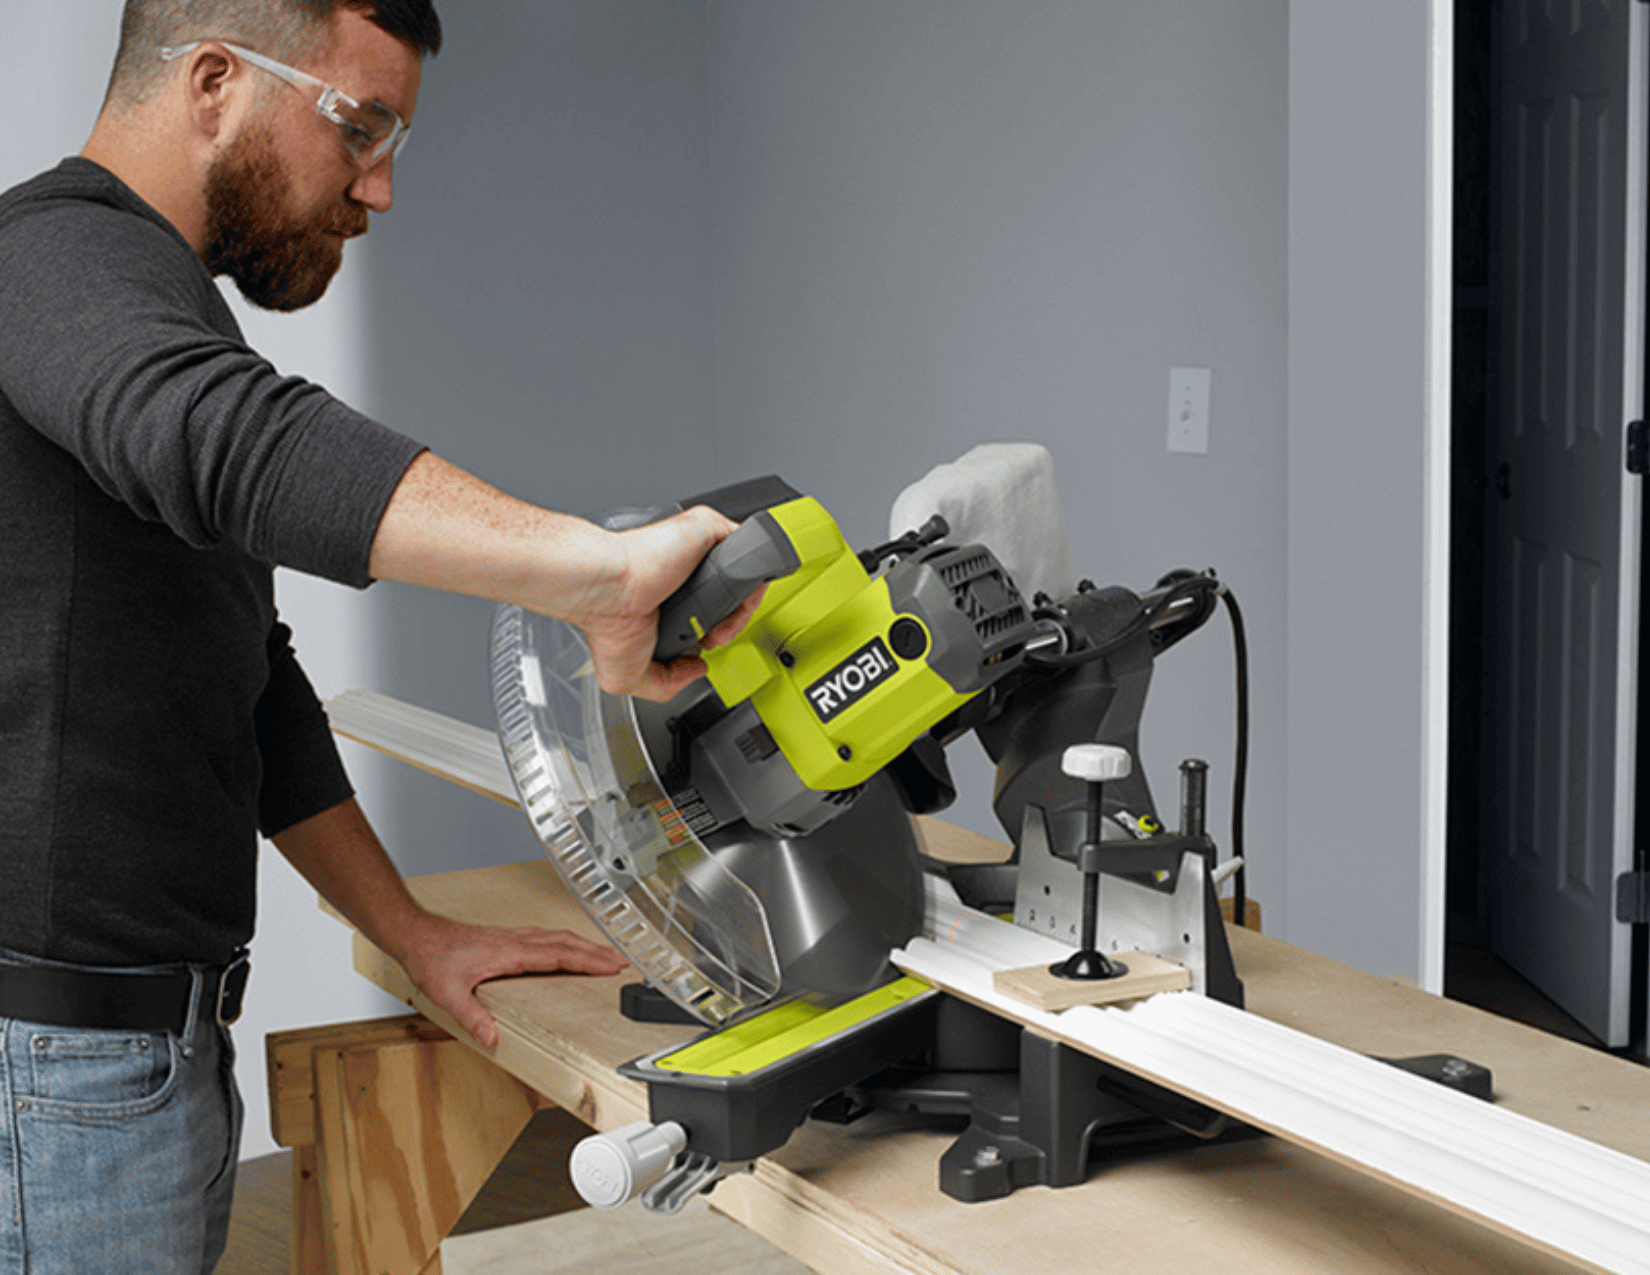 How to Make Perfect Cuts with a Ryobi Trim Saw